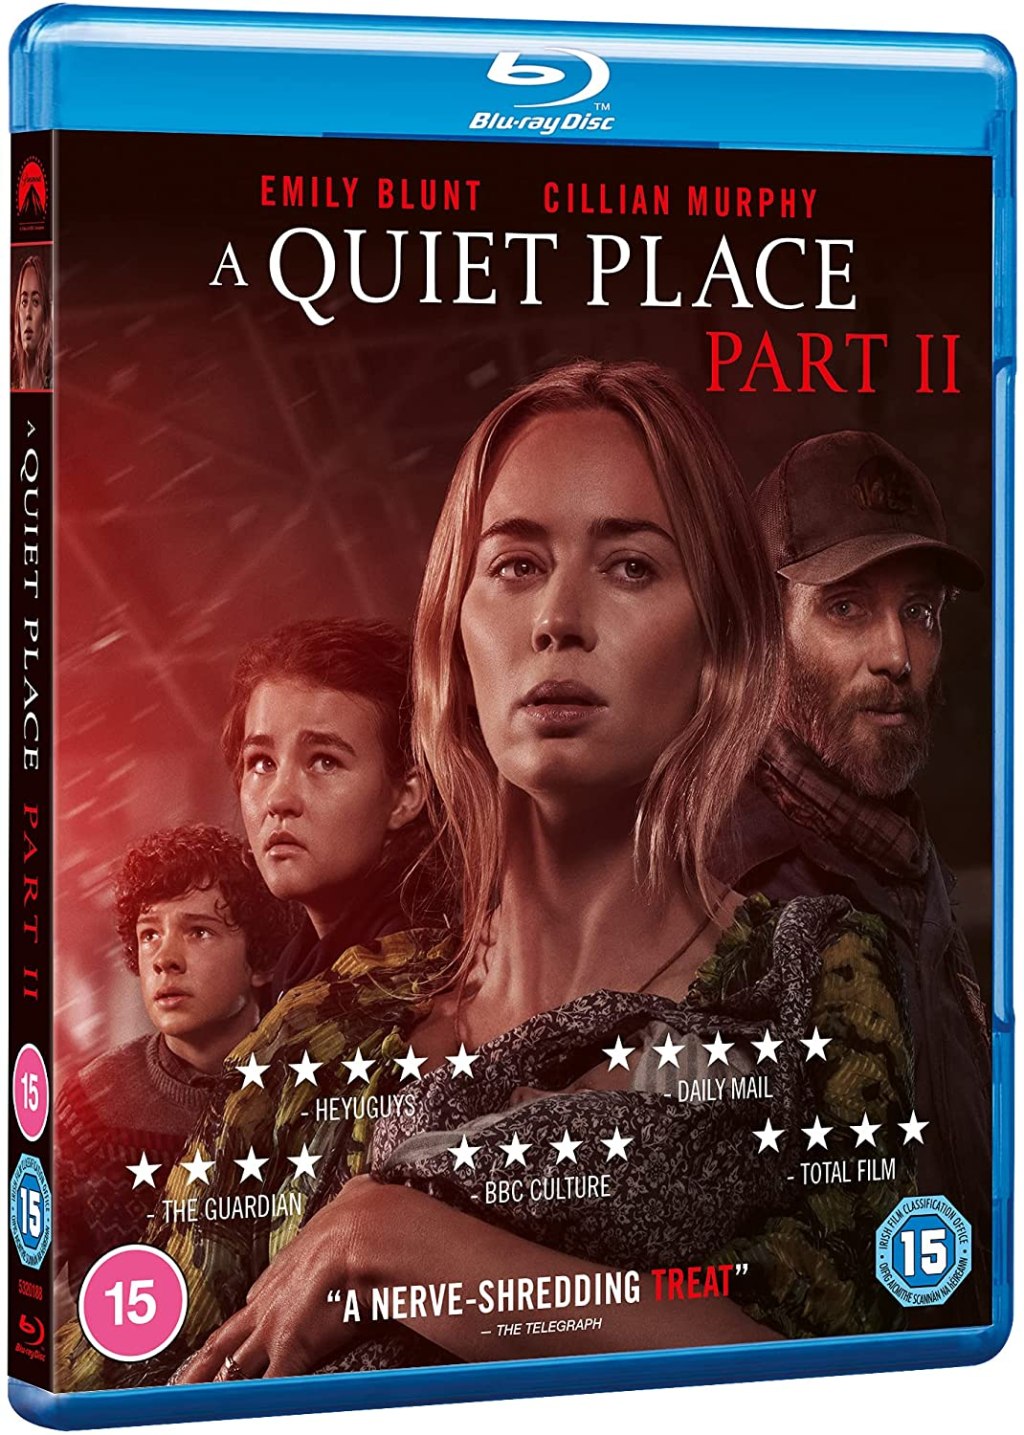 The superb A Quiet Place Part II comes to 4K UHD, Blu-ray and DVD from 30th August!